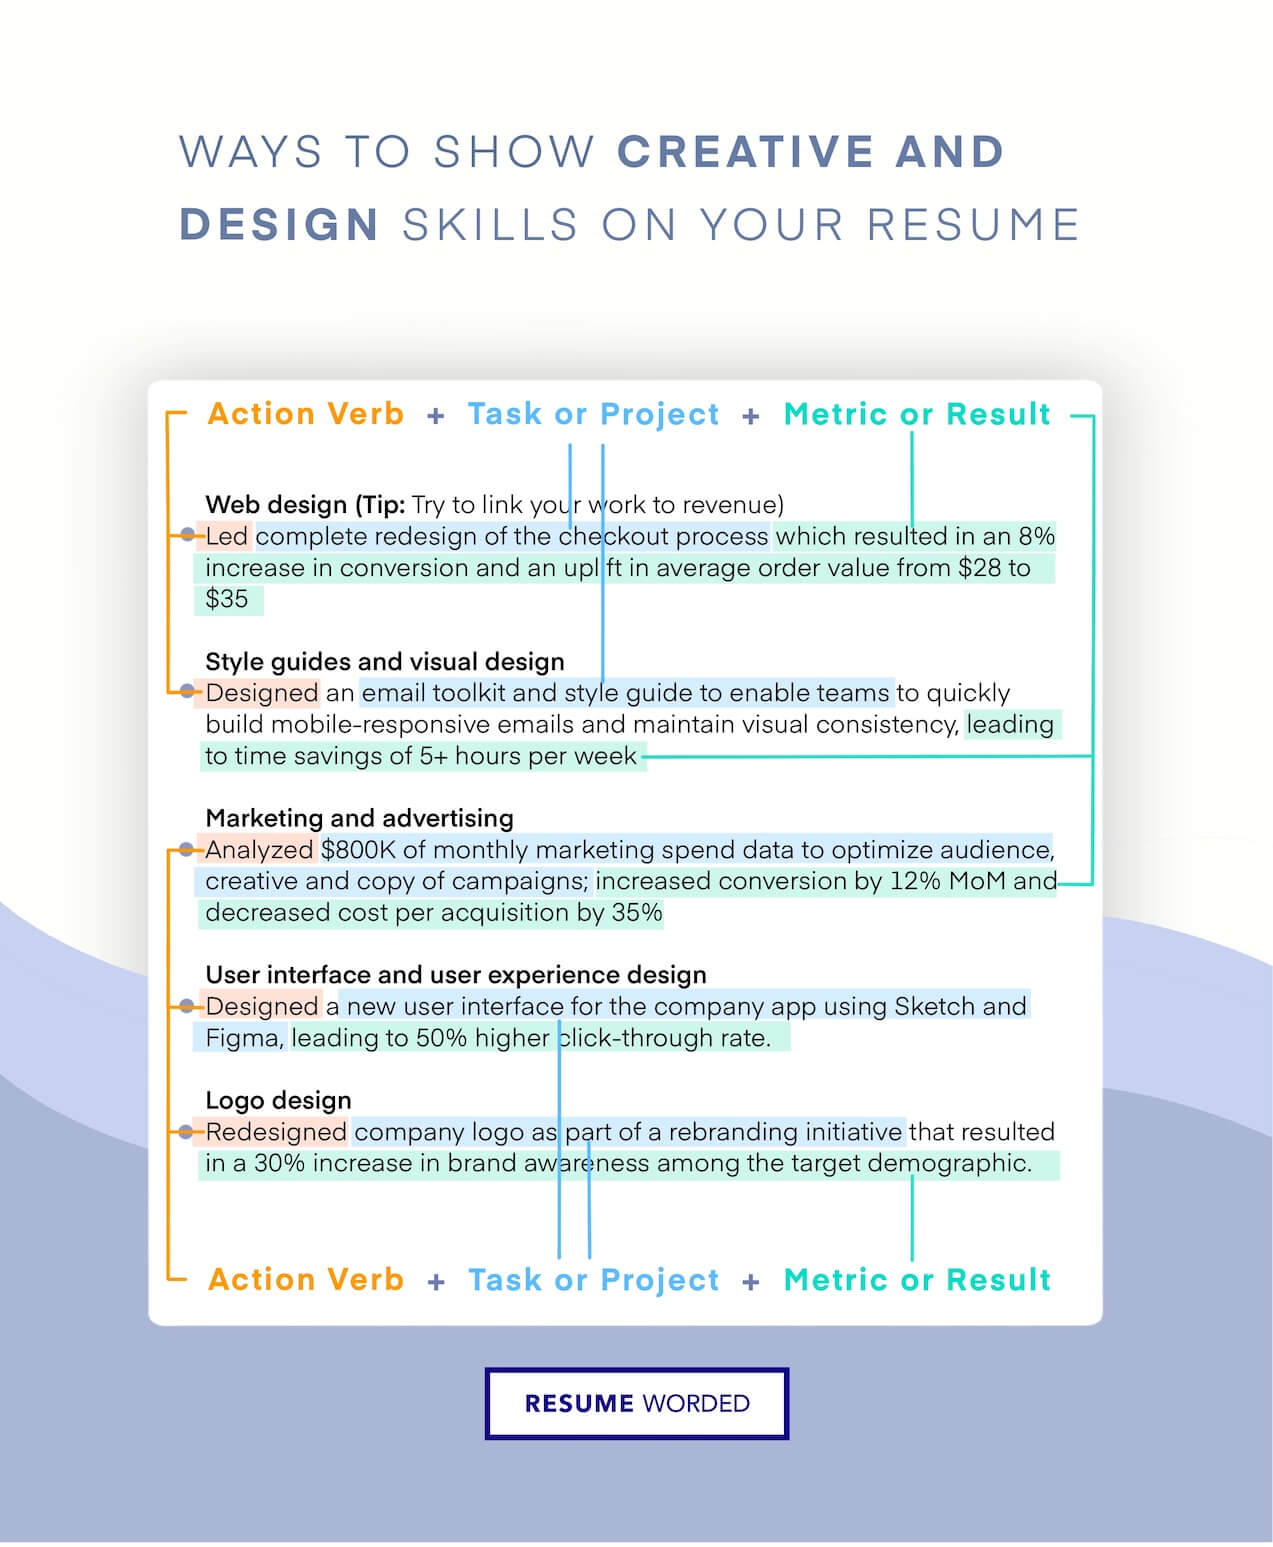 Demonstrate your ability to create innovative designs to land the role of electrical design engineer - Electrical Design Engineer Resume